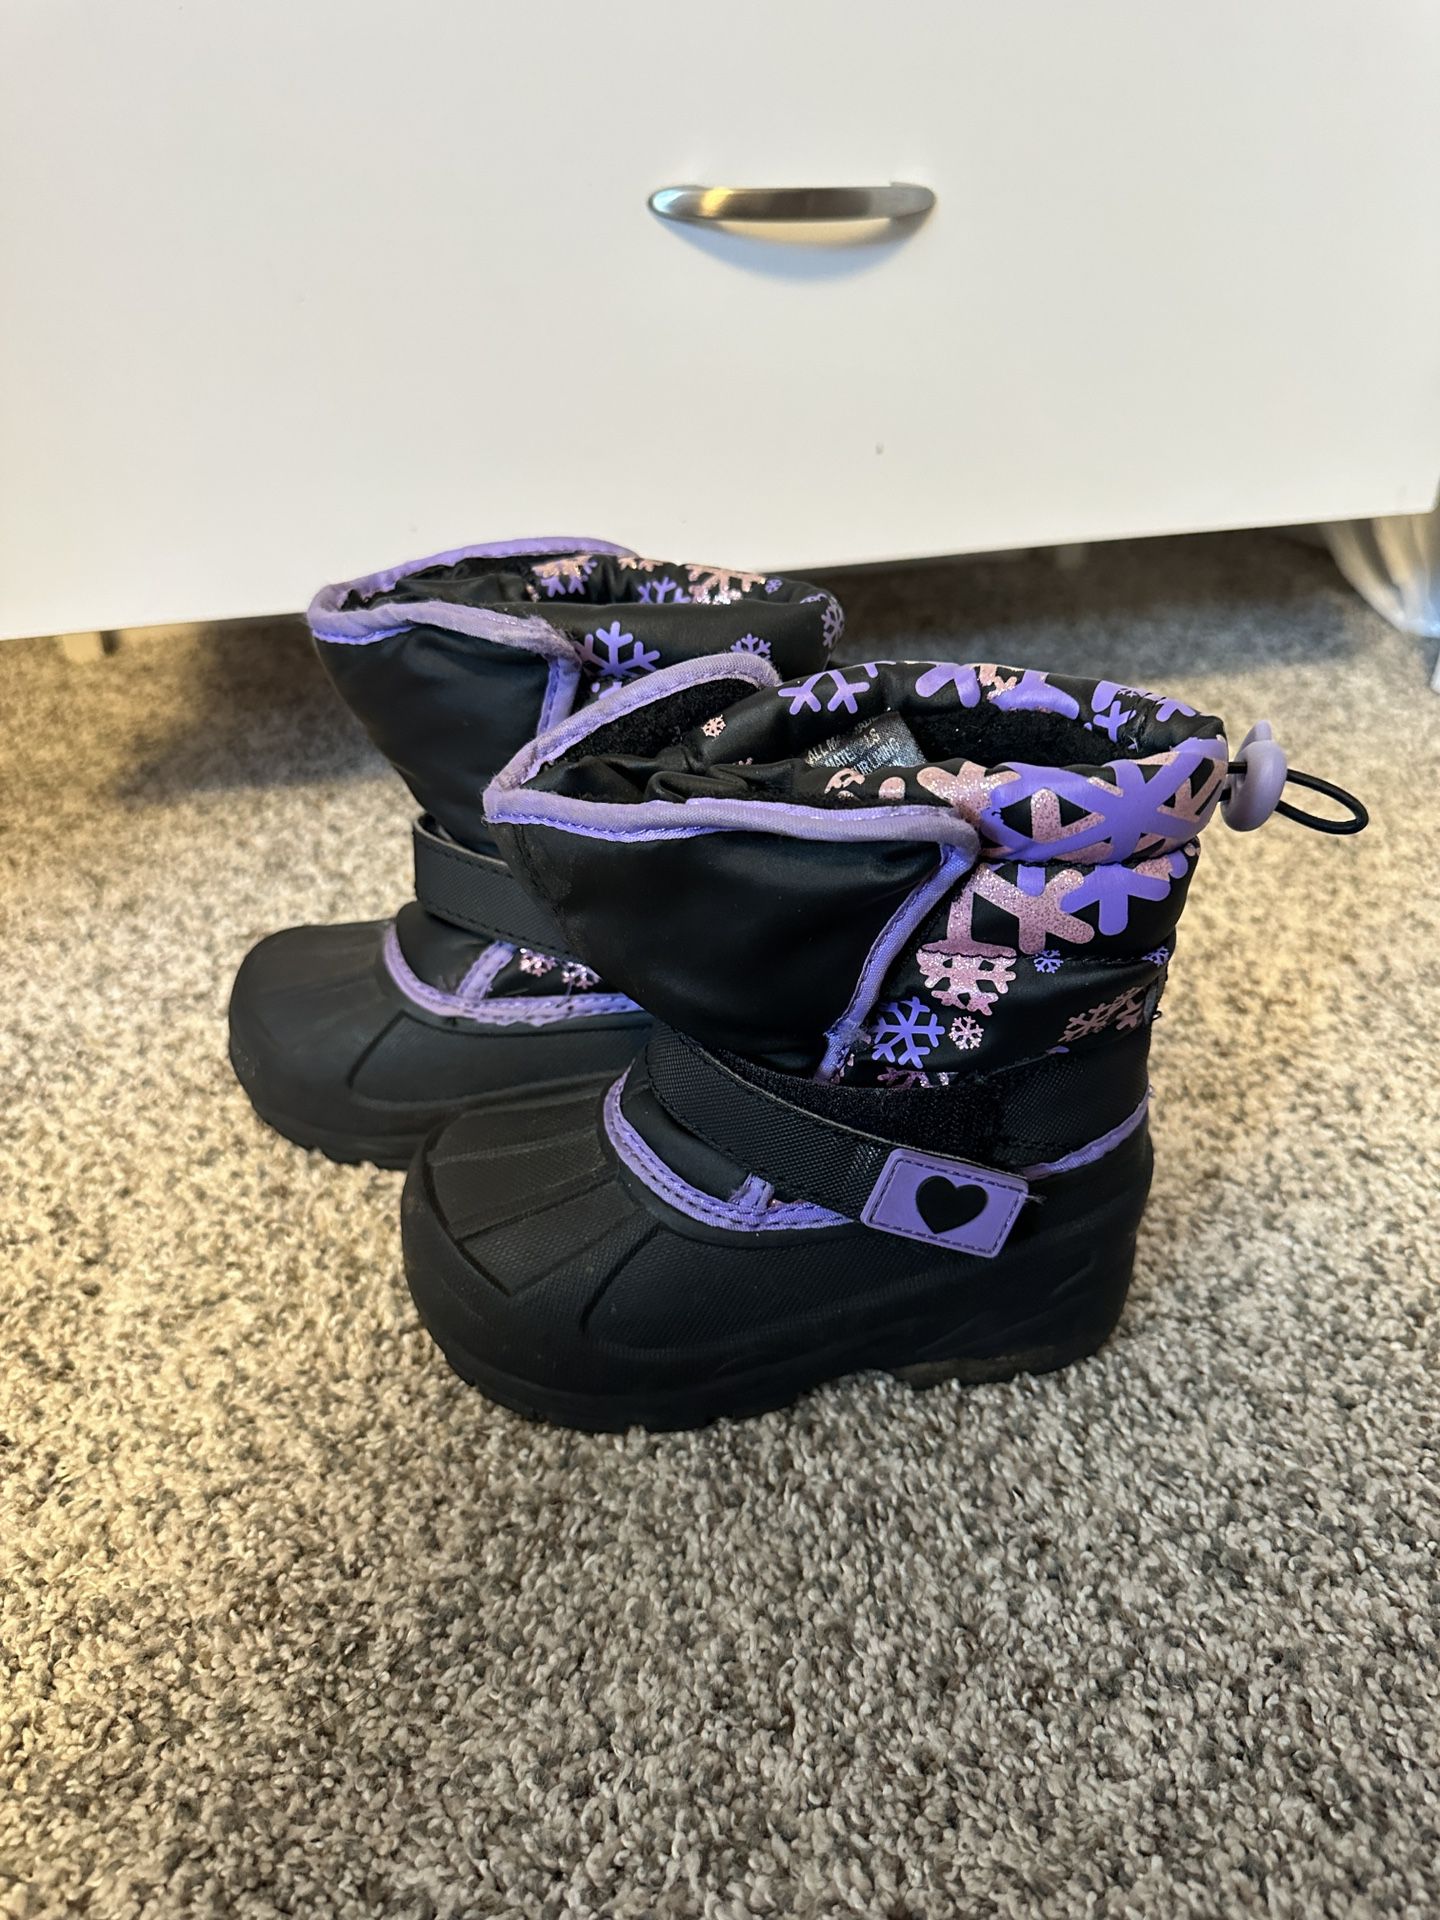 Toddler Girl Purple Snow Boots Size 8 Toddler